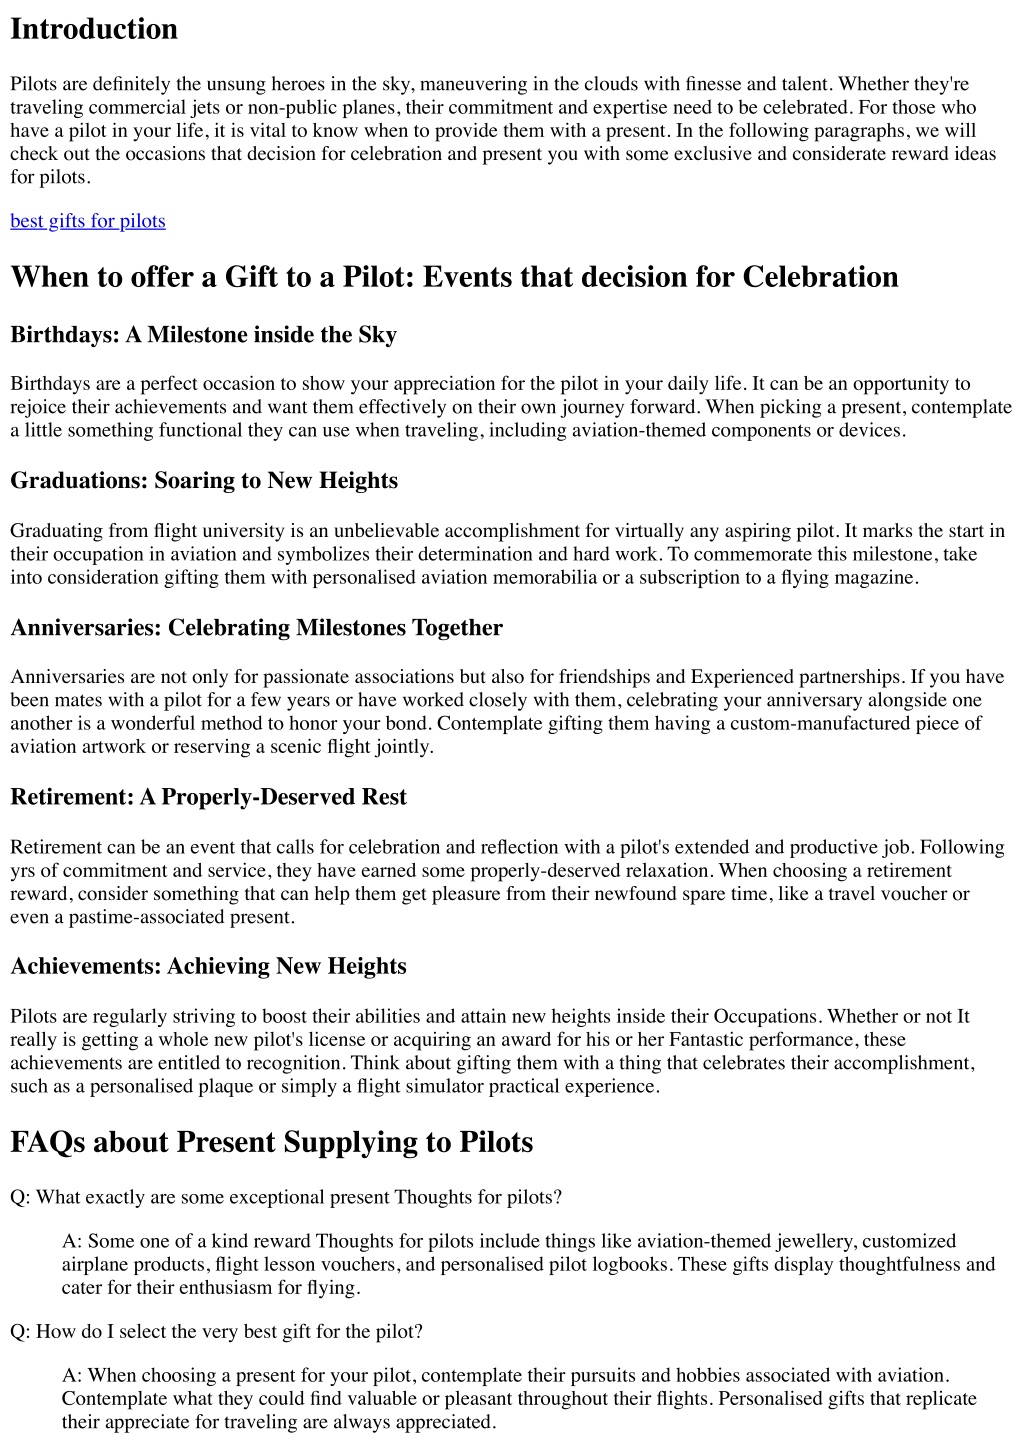 26 Best Gifts for Pilots | Gift Ideas from Actual Pilots - Thrust Flight